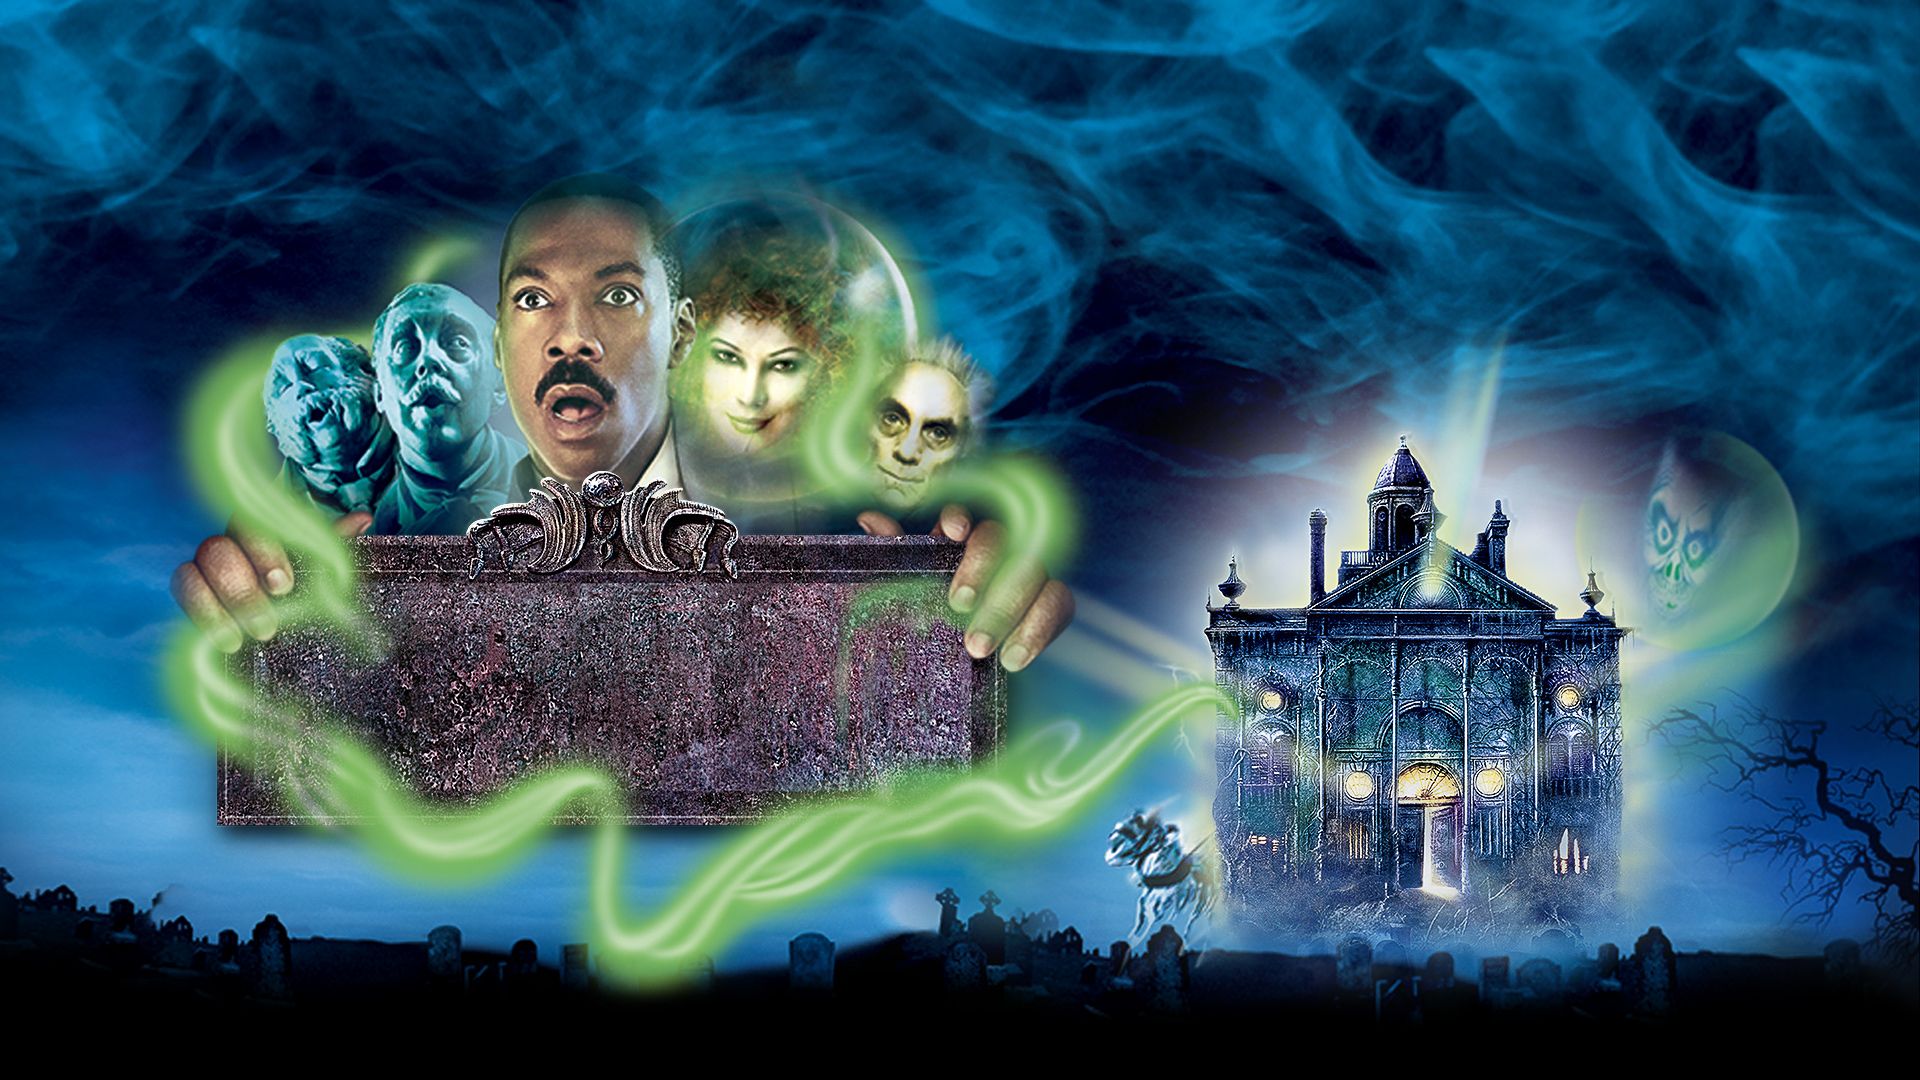 The Haunted Mansion background